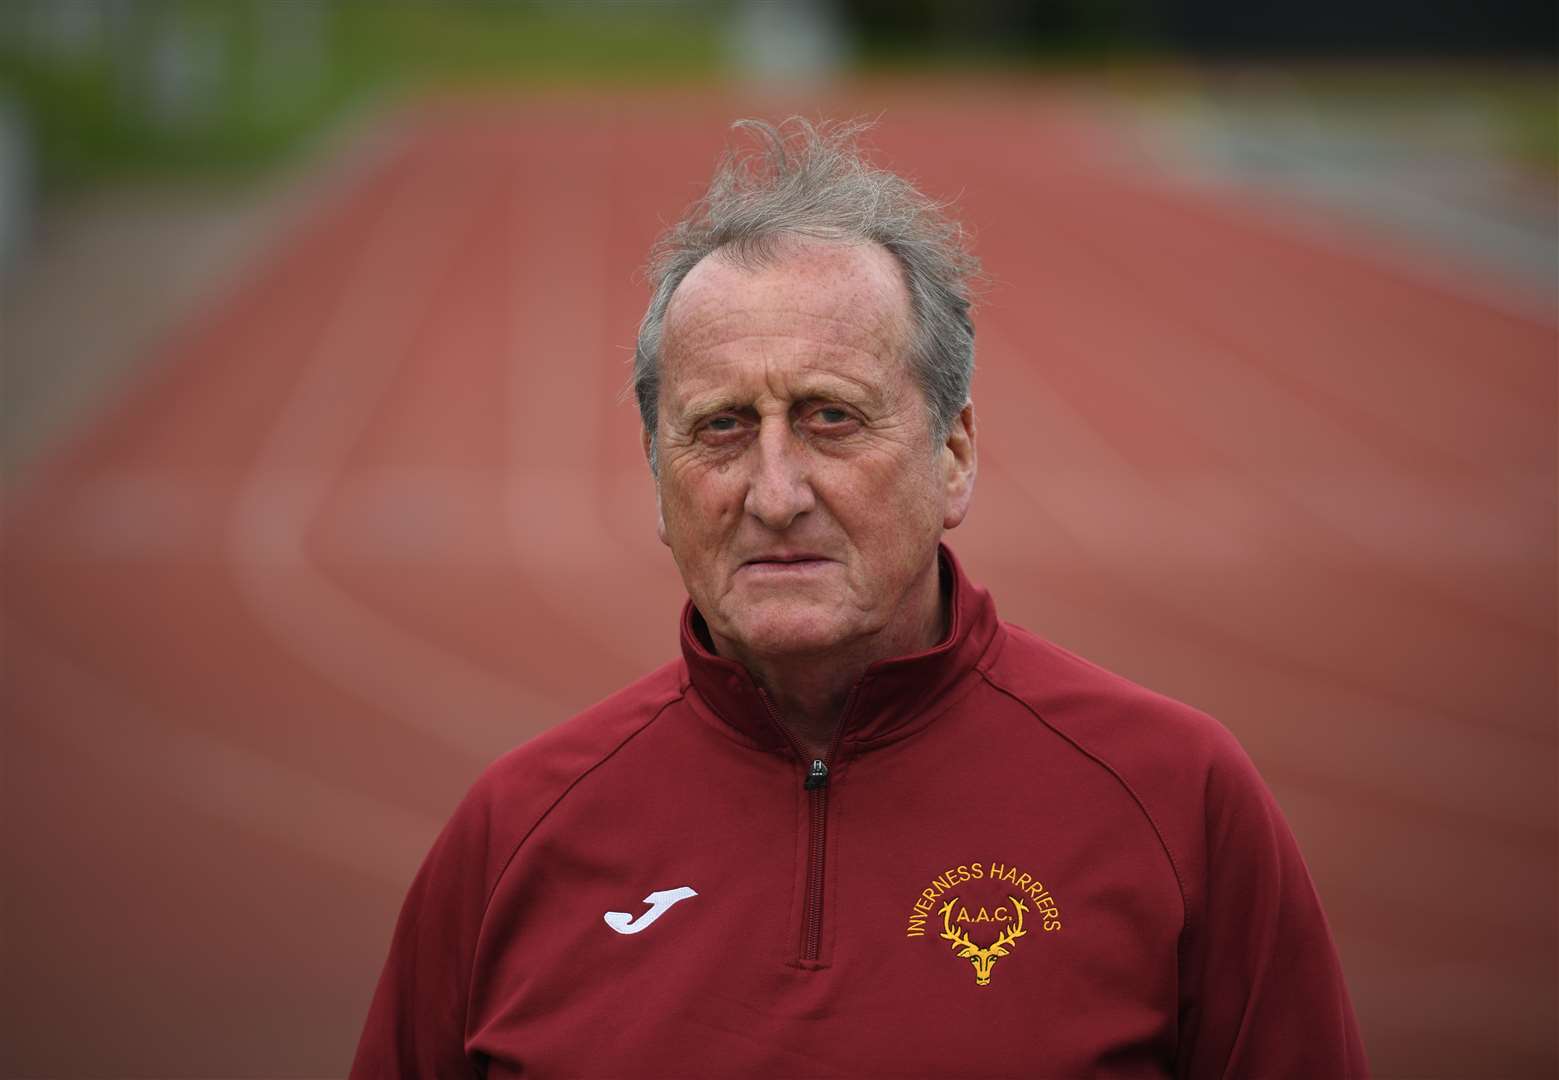 Inverness Harriers president Charlie Forbes says the track is vital to north athletics.